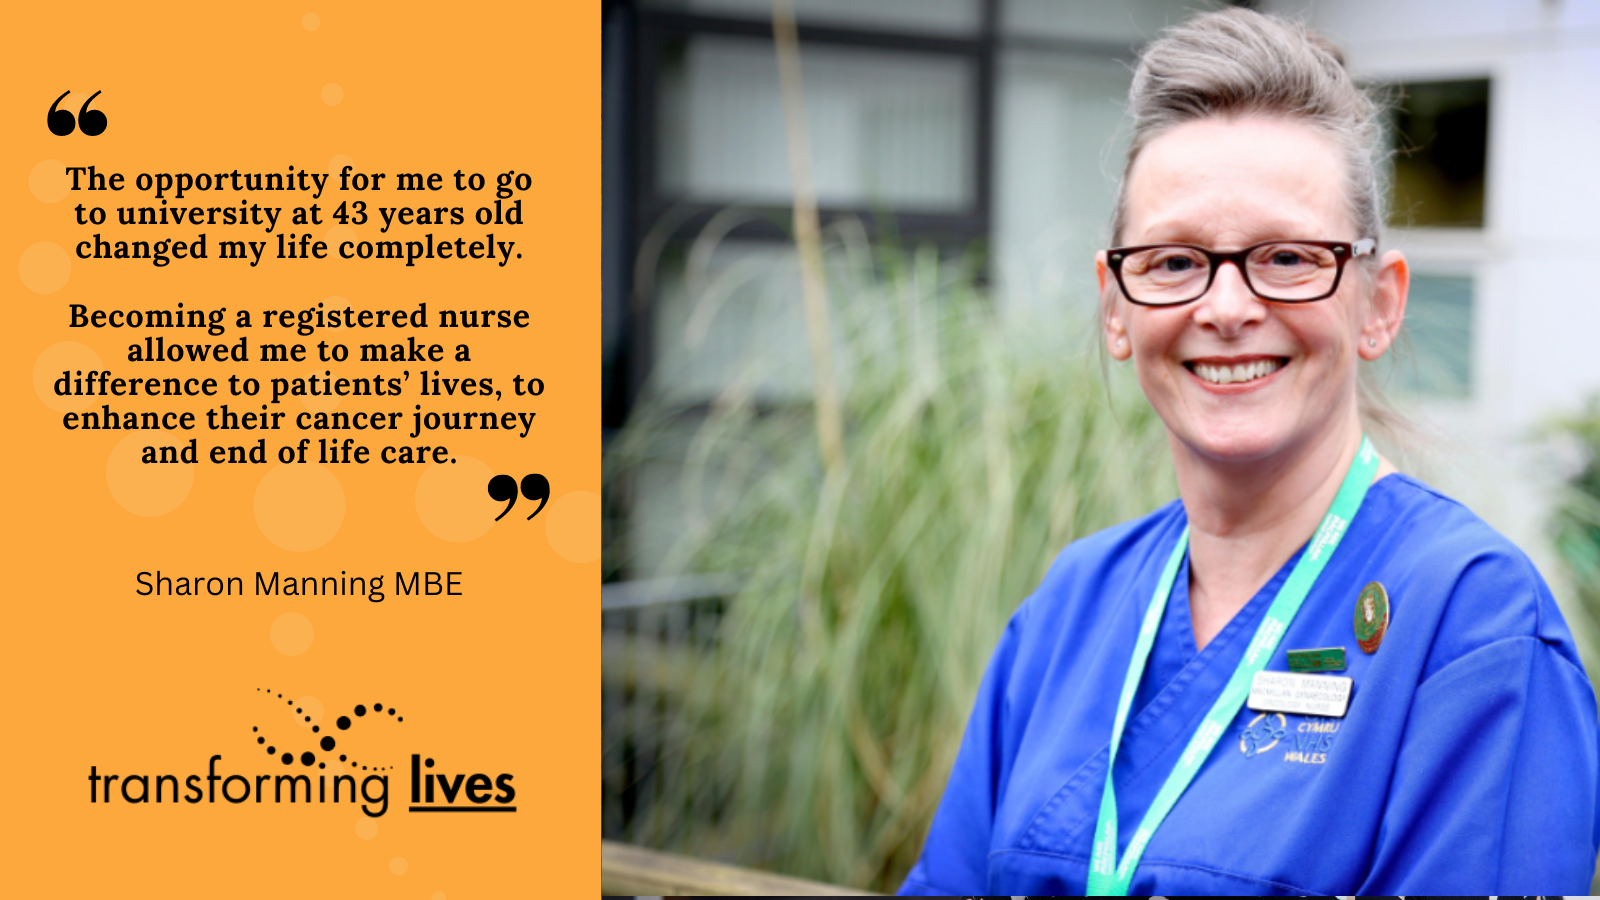 "The opportunity for me to go to university at 43 years old changed my life completely.  Becoming a registered nurse allowed me to make a difference to patients’ lives, to enhance their cancer journey and end of life care."